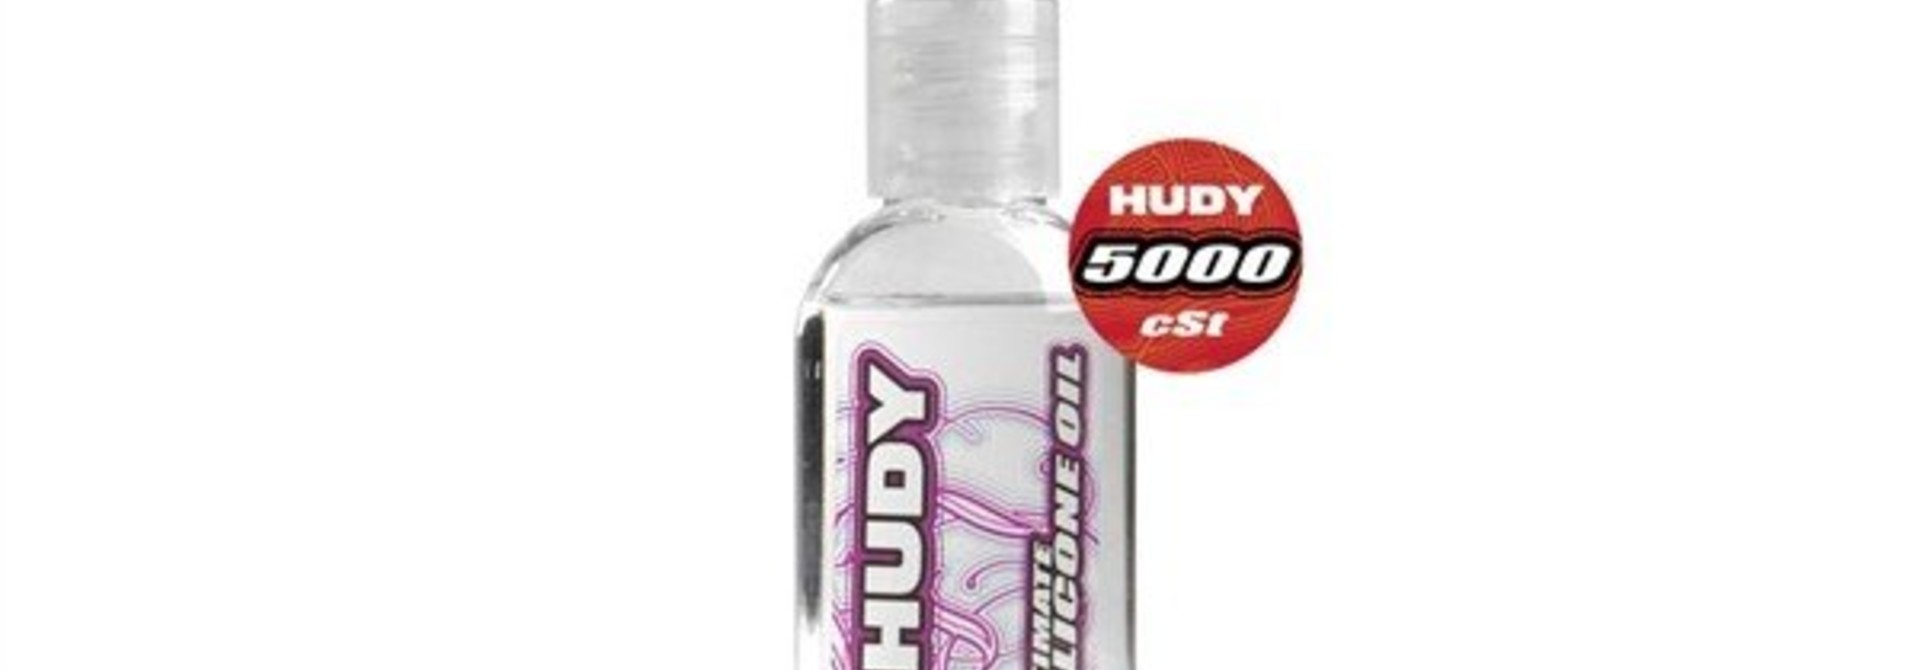 HUDY ULTIMATE SILICONE OIL 5000 cSt - 50ML. H106450